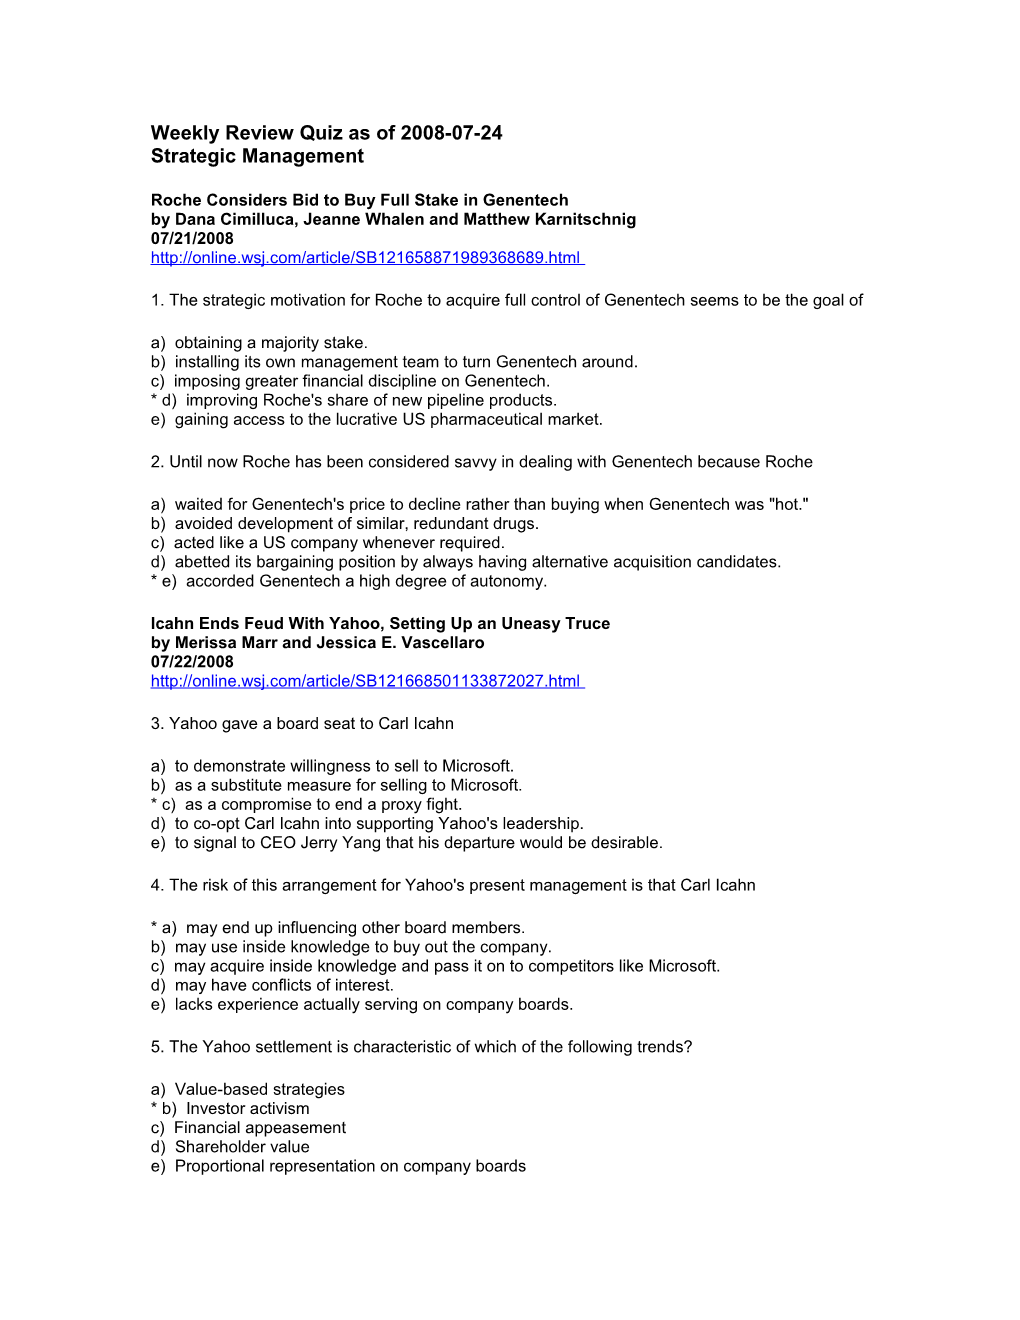 Weekly Review Quiz As of 2008-07-24 Strategic Management